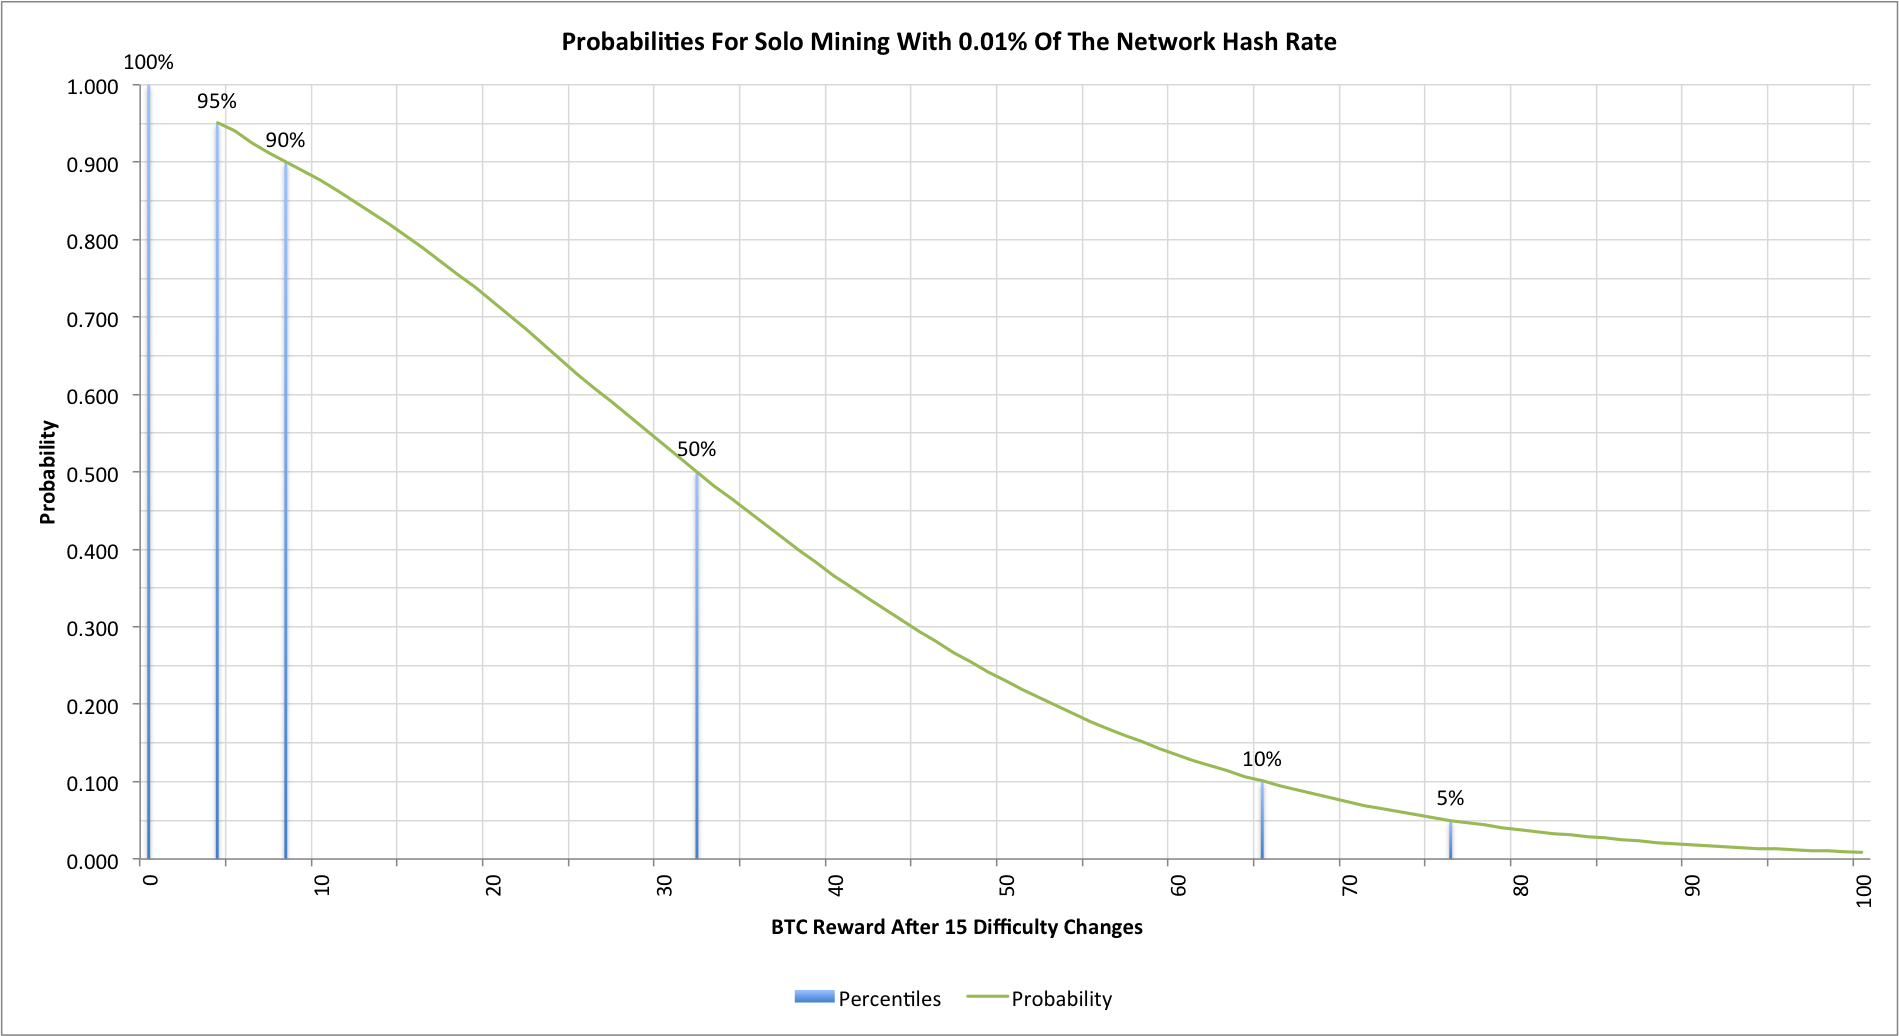 Solo mining with 0.01% of the Bitcoin hash rate for 15 difficulty changes